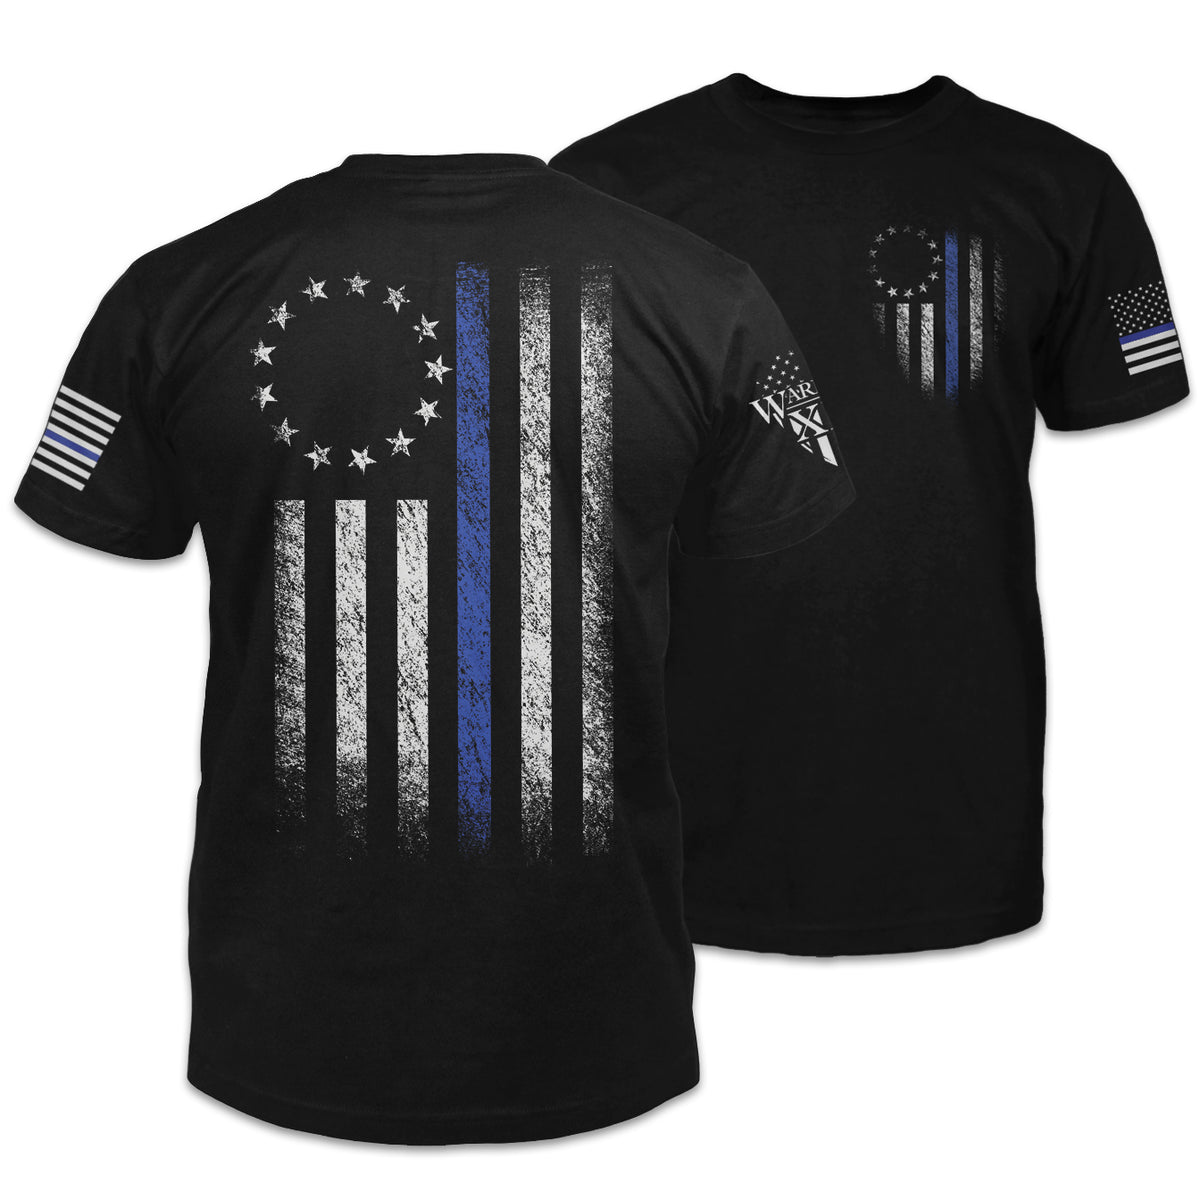 Front & back black t-shirt that features a thin blue line Betsy Ross flag on a back print to show that we remain undeterred in our support for American law enforcement. printed on the shirt.